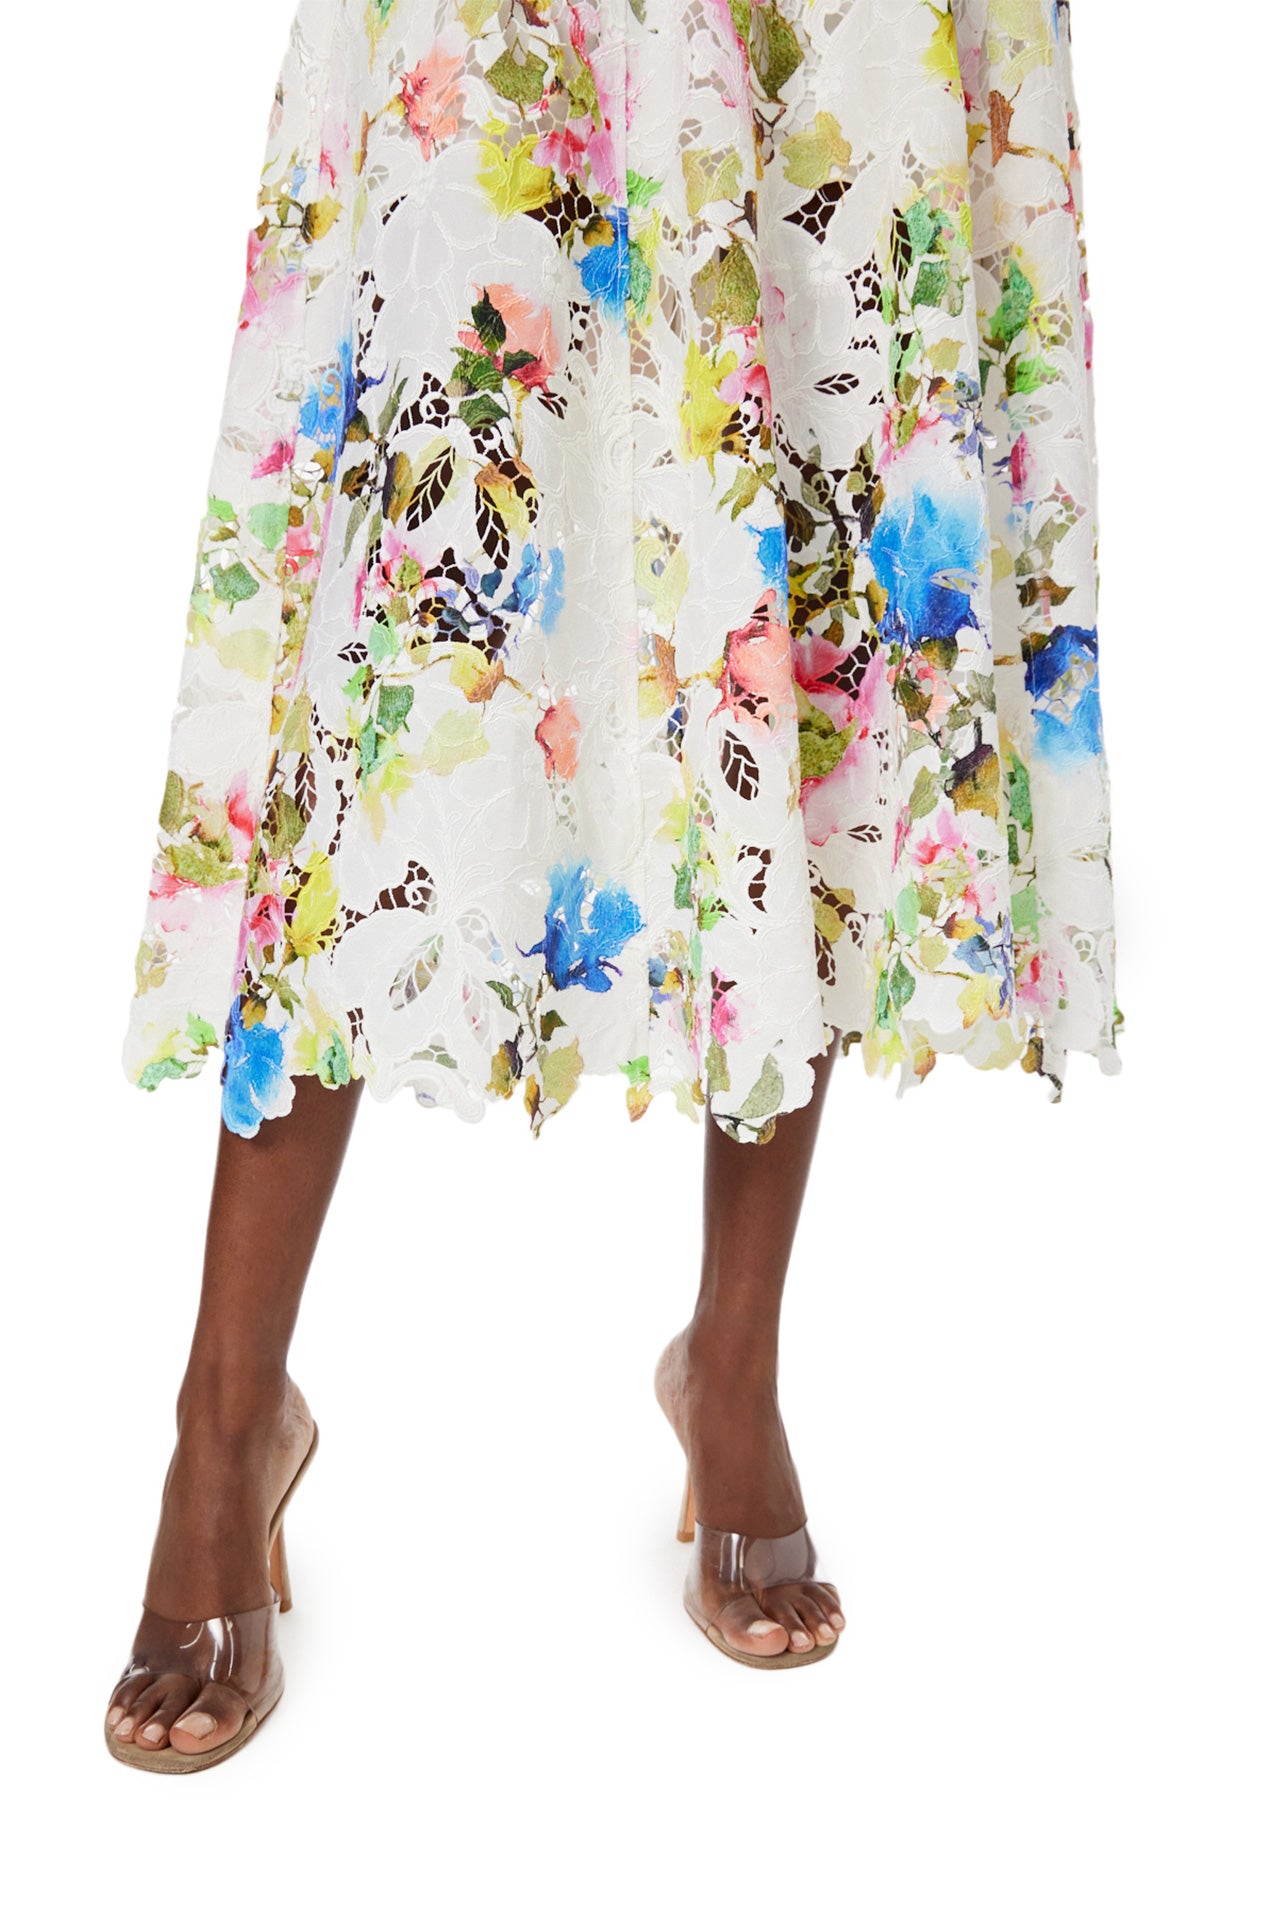 Monique Lhuillier Spring 2024 silk white floral printed lace shirt dress with pockets and a scalloped hem - scalloped hem.